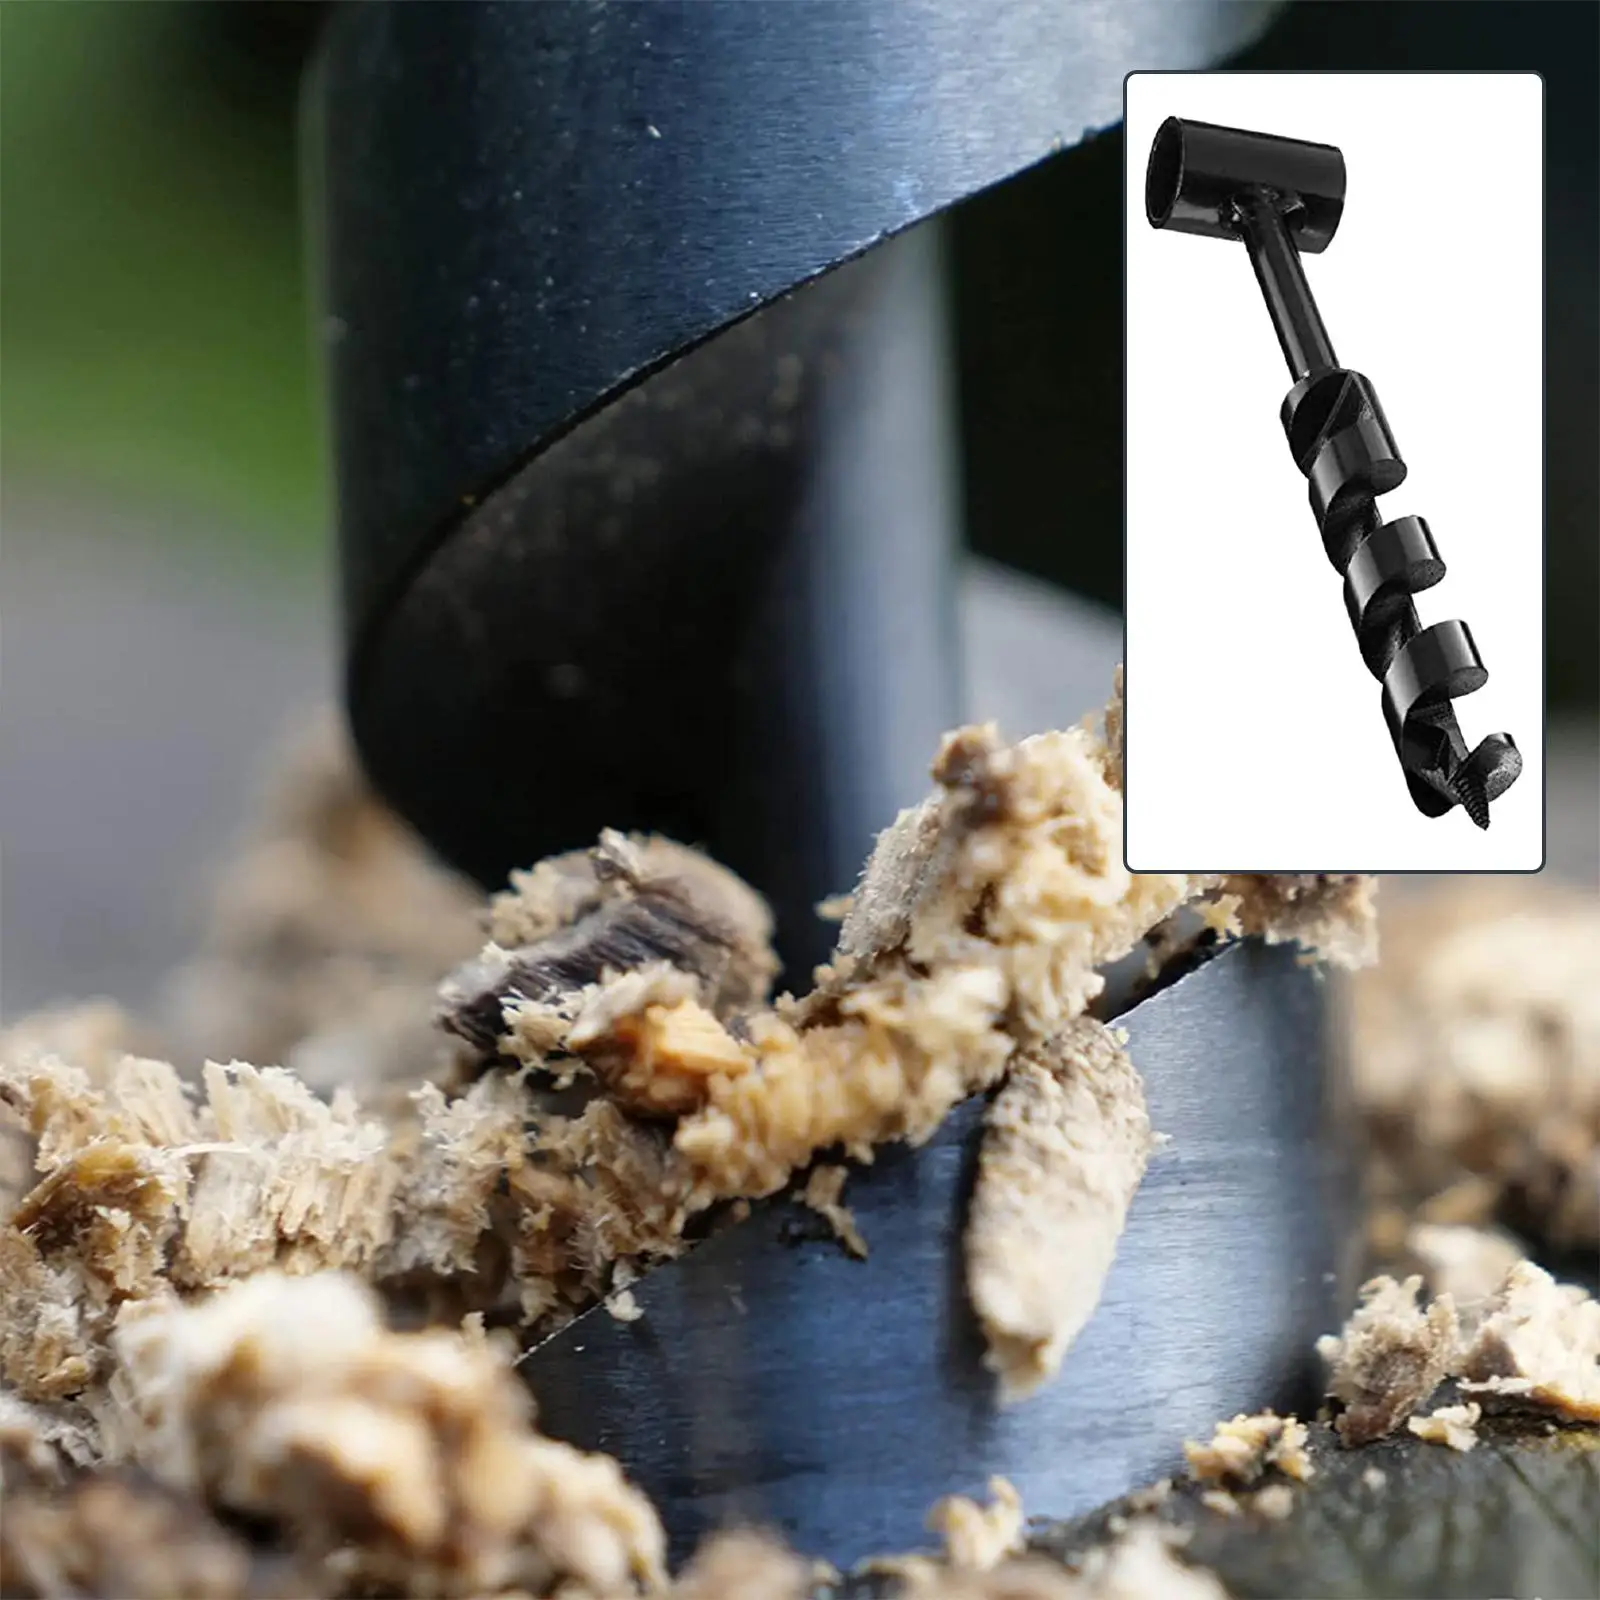 Garden Auger Hand Drill Bit Multi Use Camping Tools Spiral Bit Hole Auger  Digger Carbon  Drill Bit Auger for Wood Drill